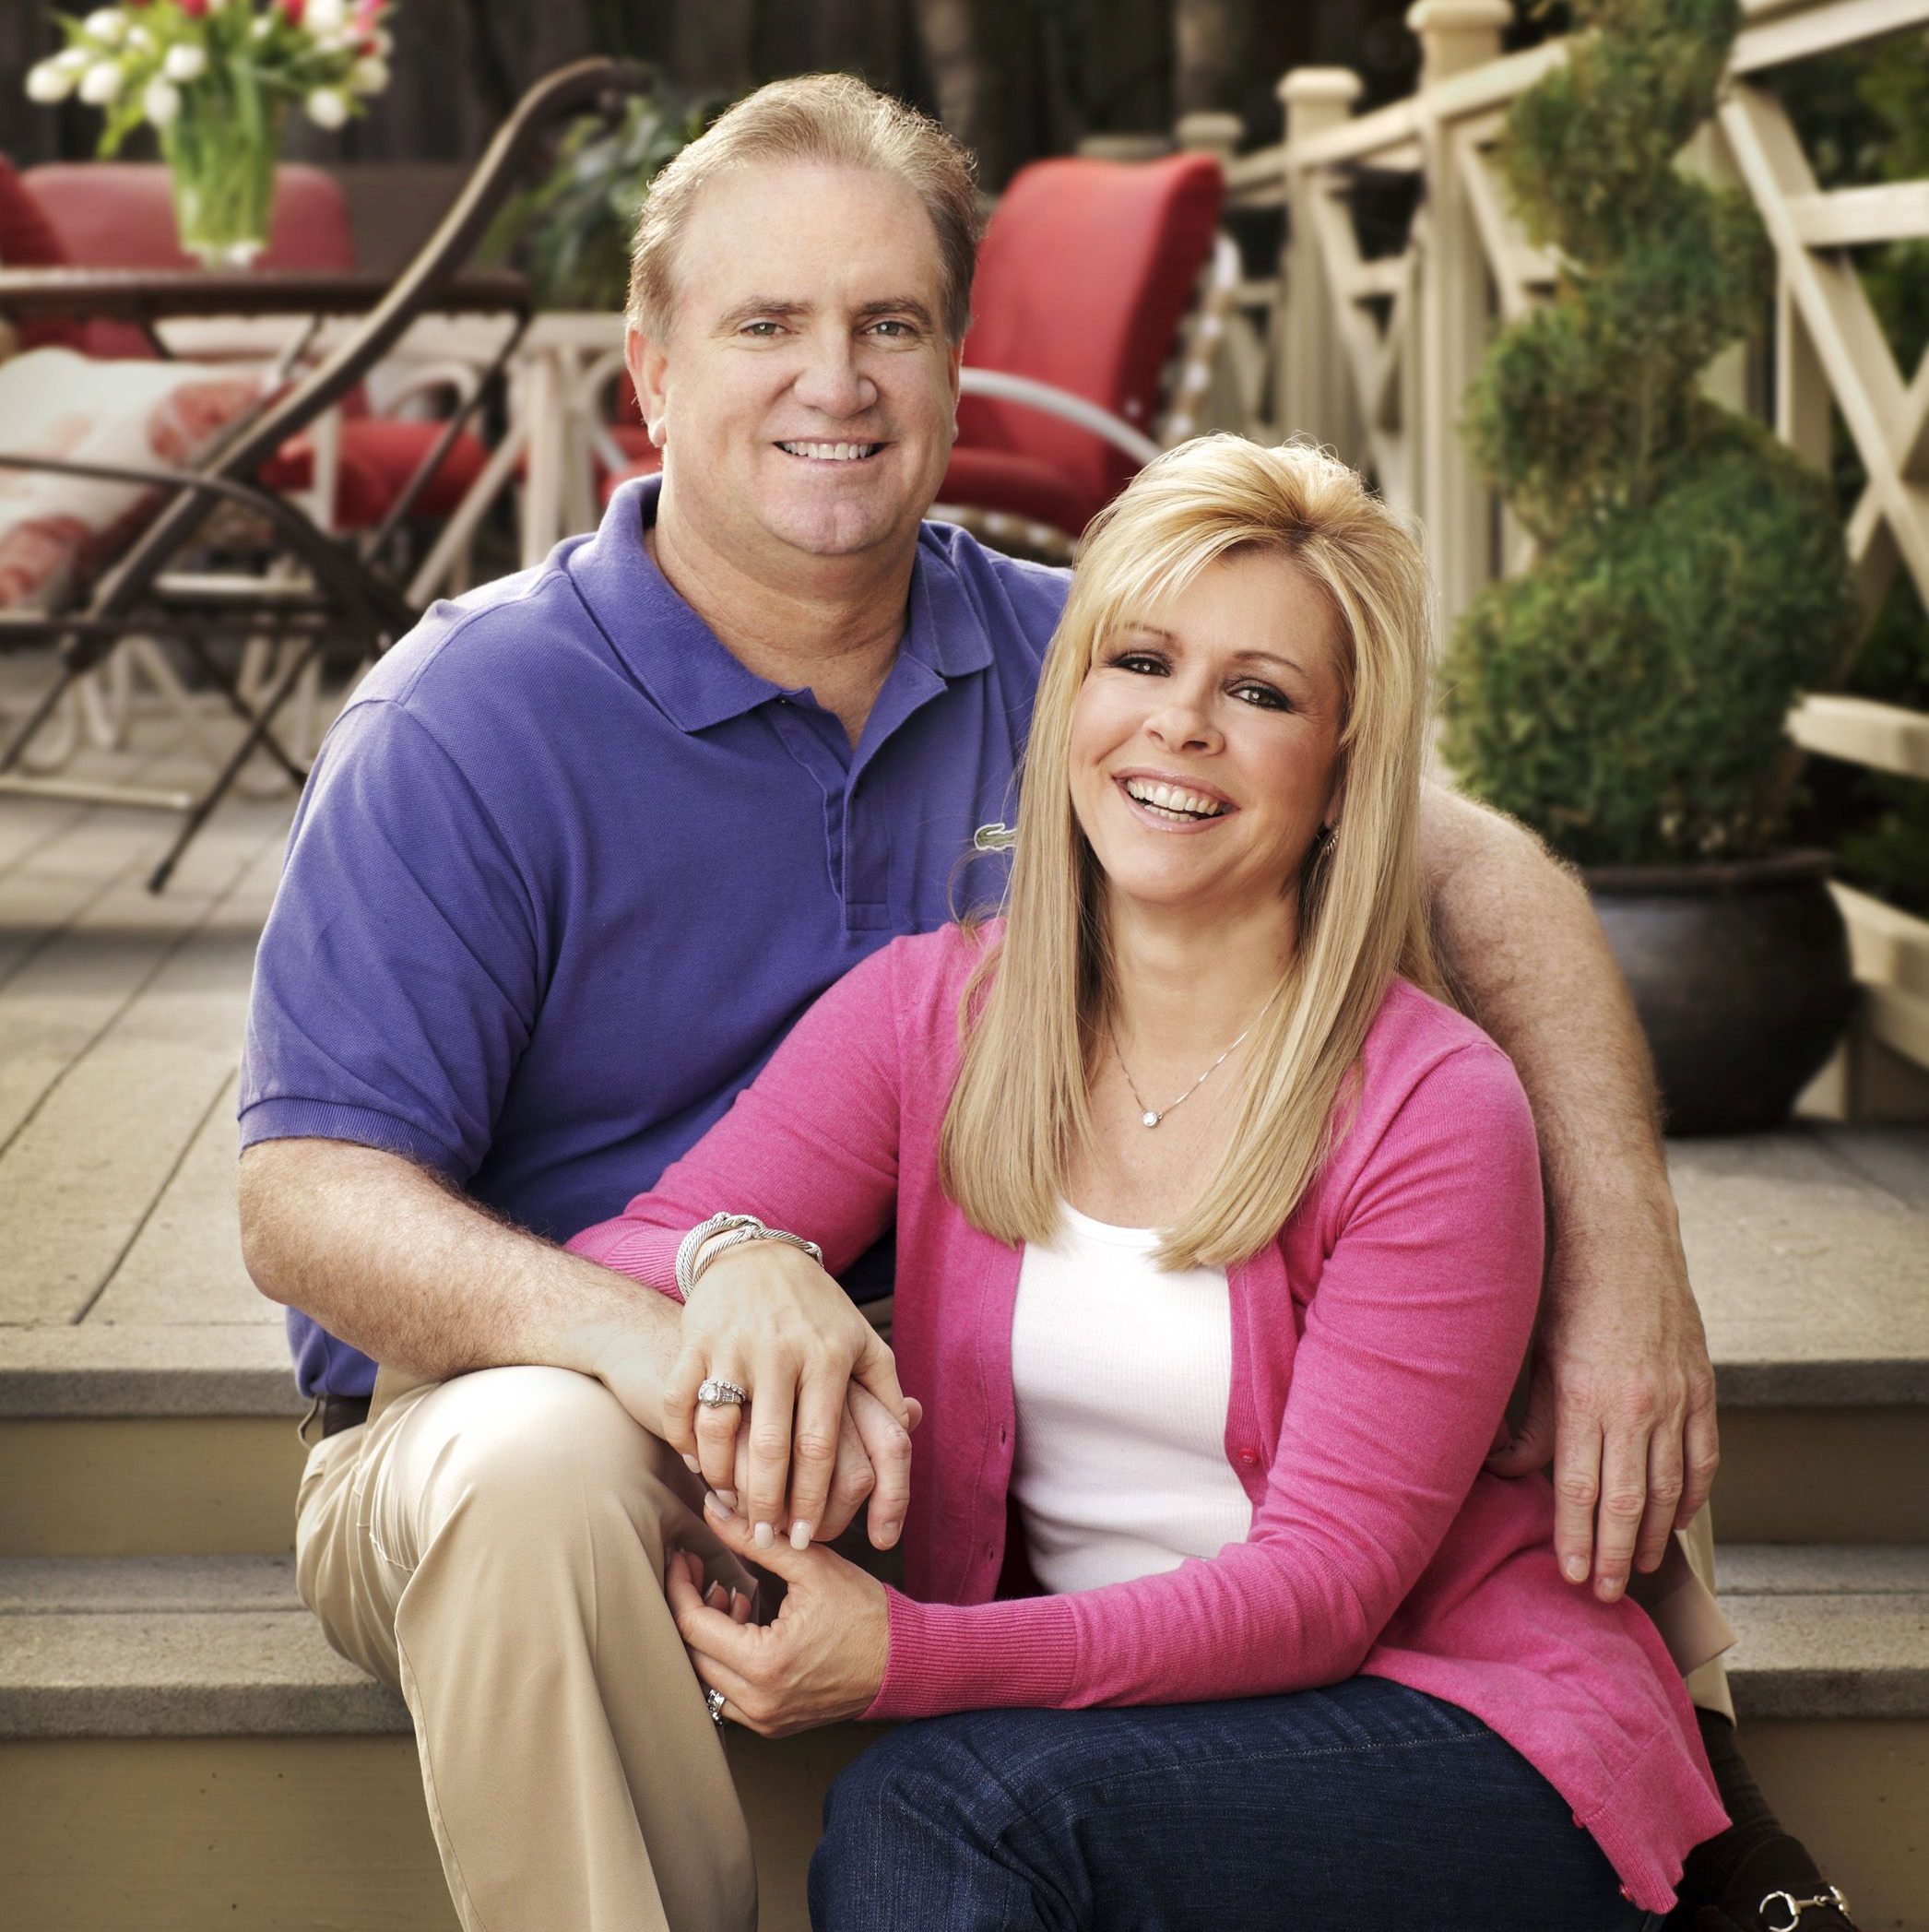 Sean and Leigh Anne Touhy said they were "devastated" by the lawsuit and denied its allegations